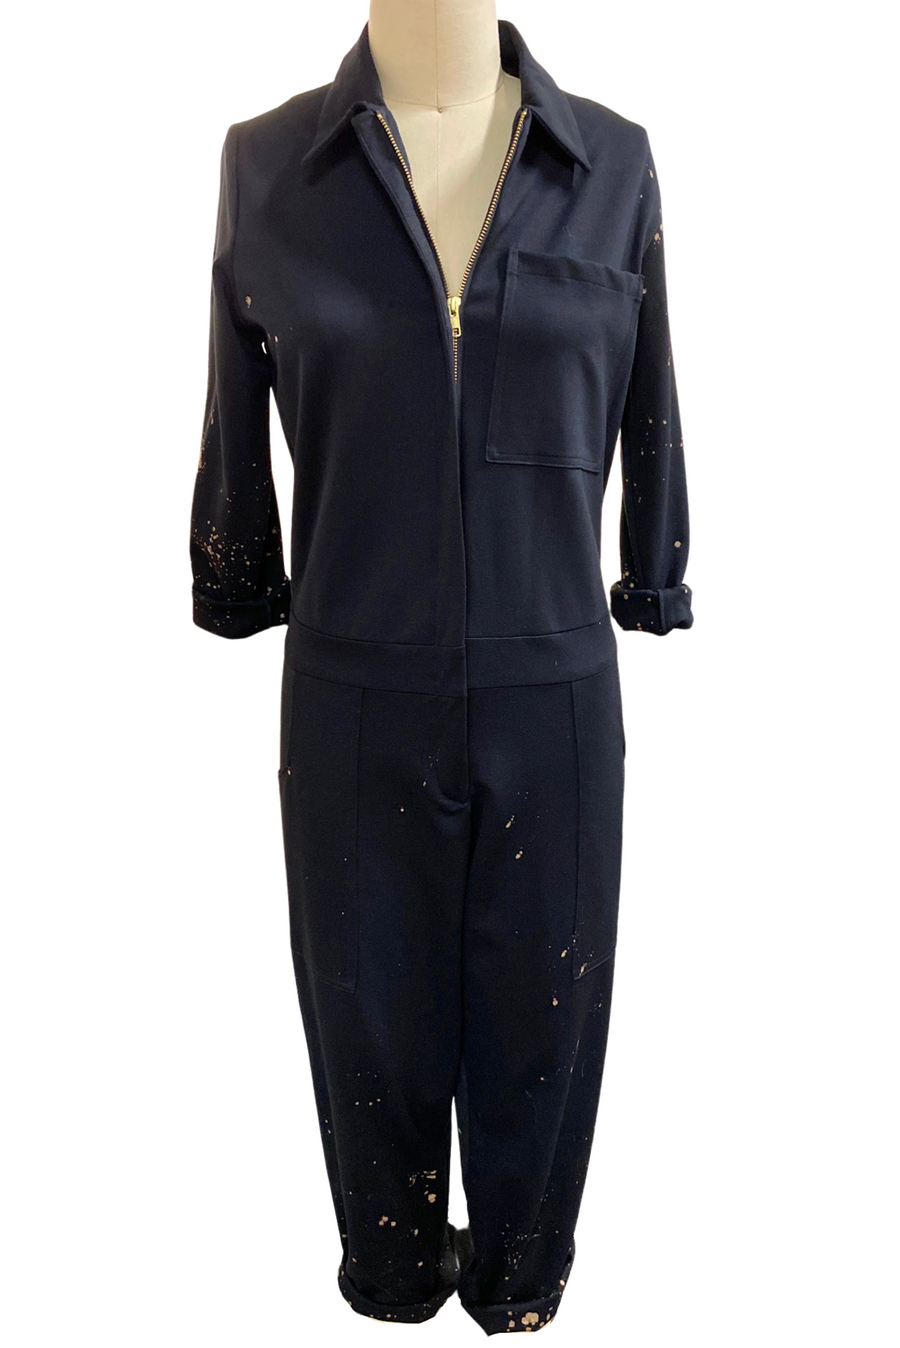 All Season Coveralls with Long Sleeves